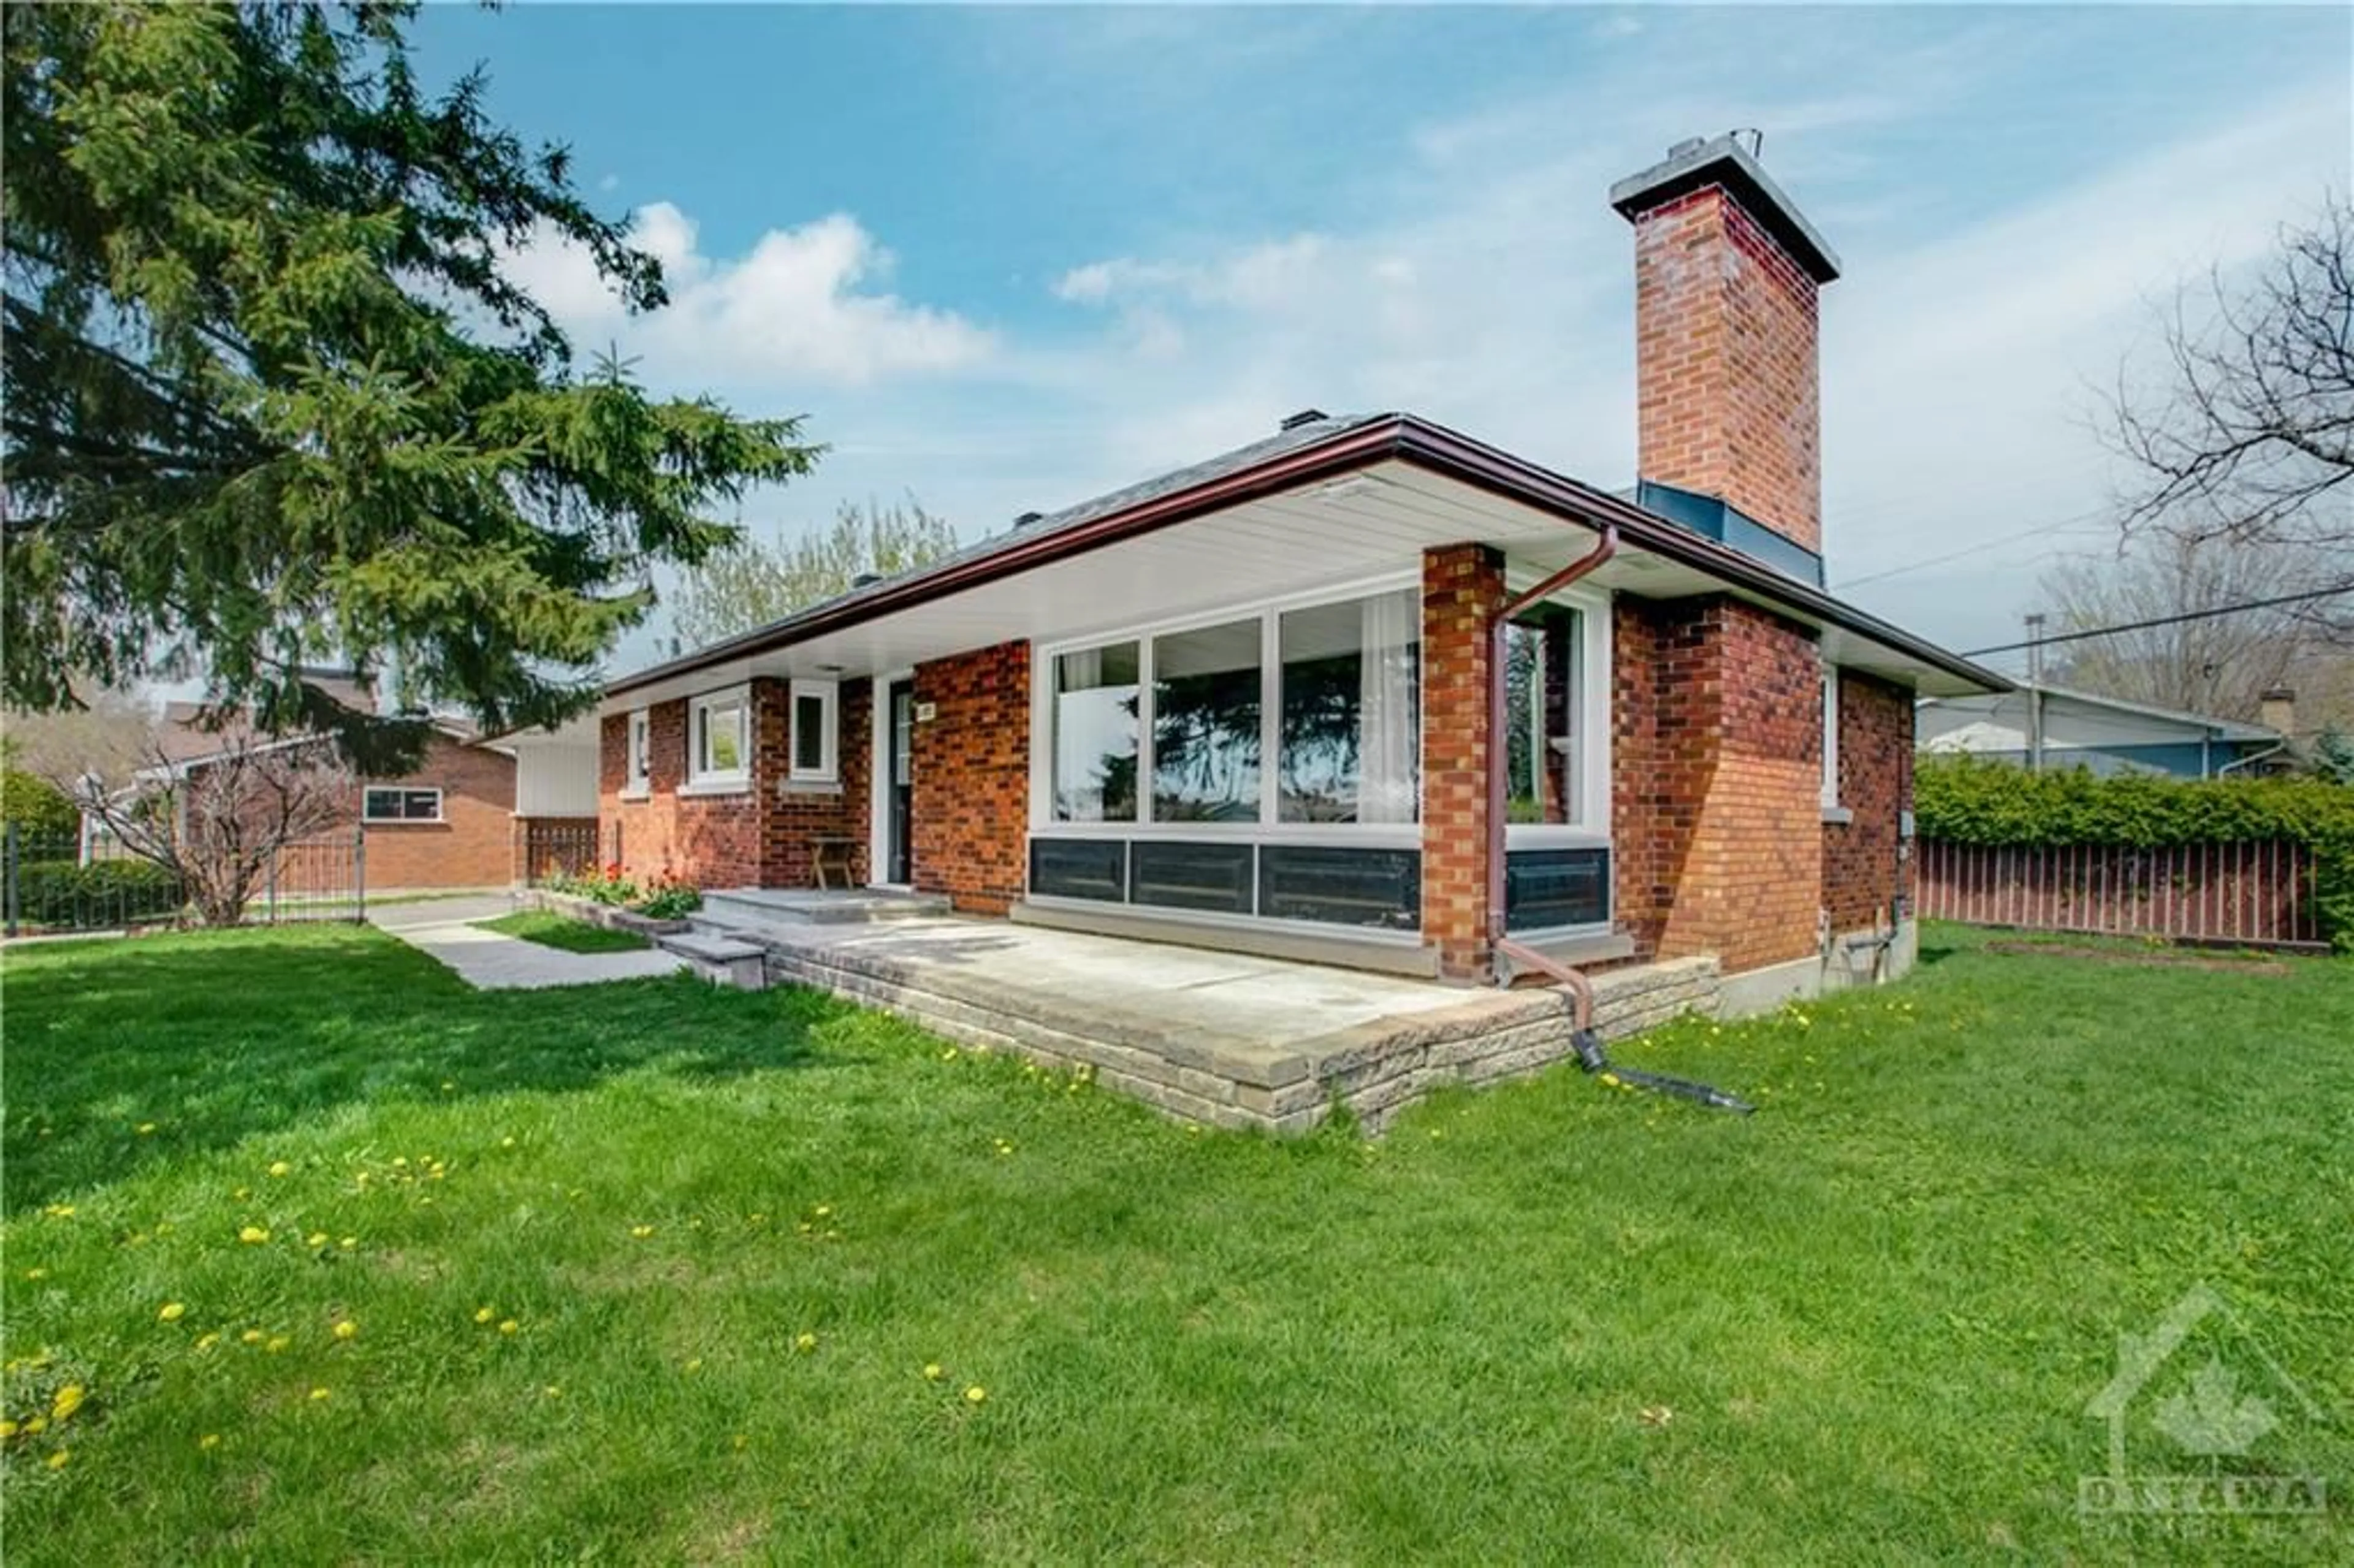 Home with brick exterior material for 2185 MARTHA Ave, Ottawa Ontario K1G 1K6